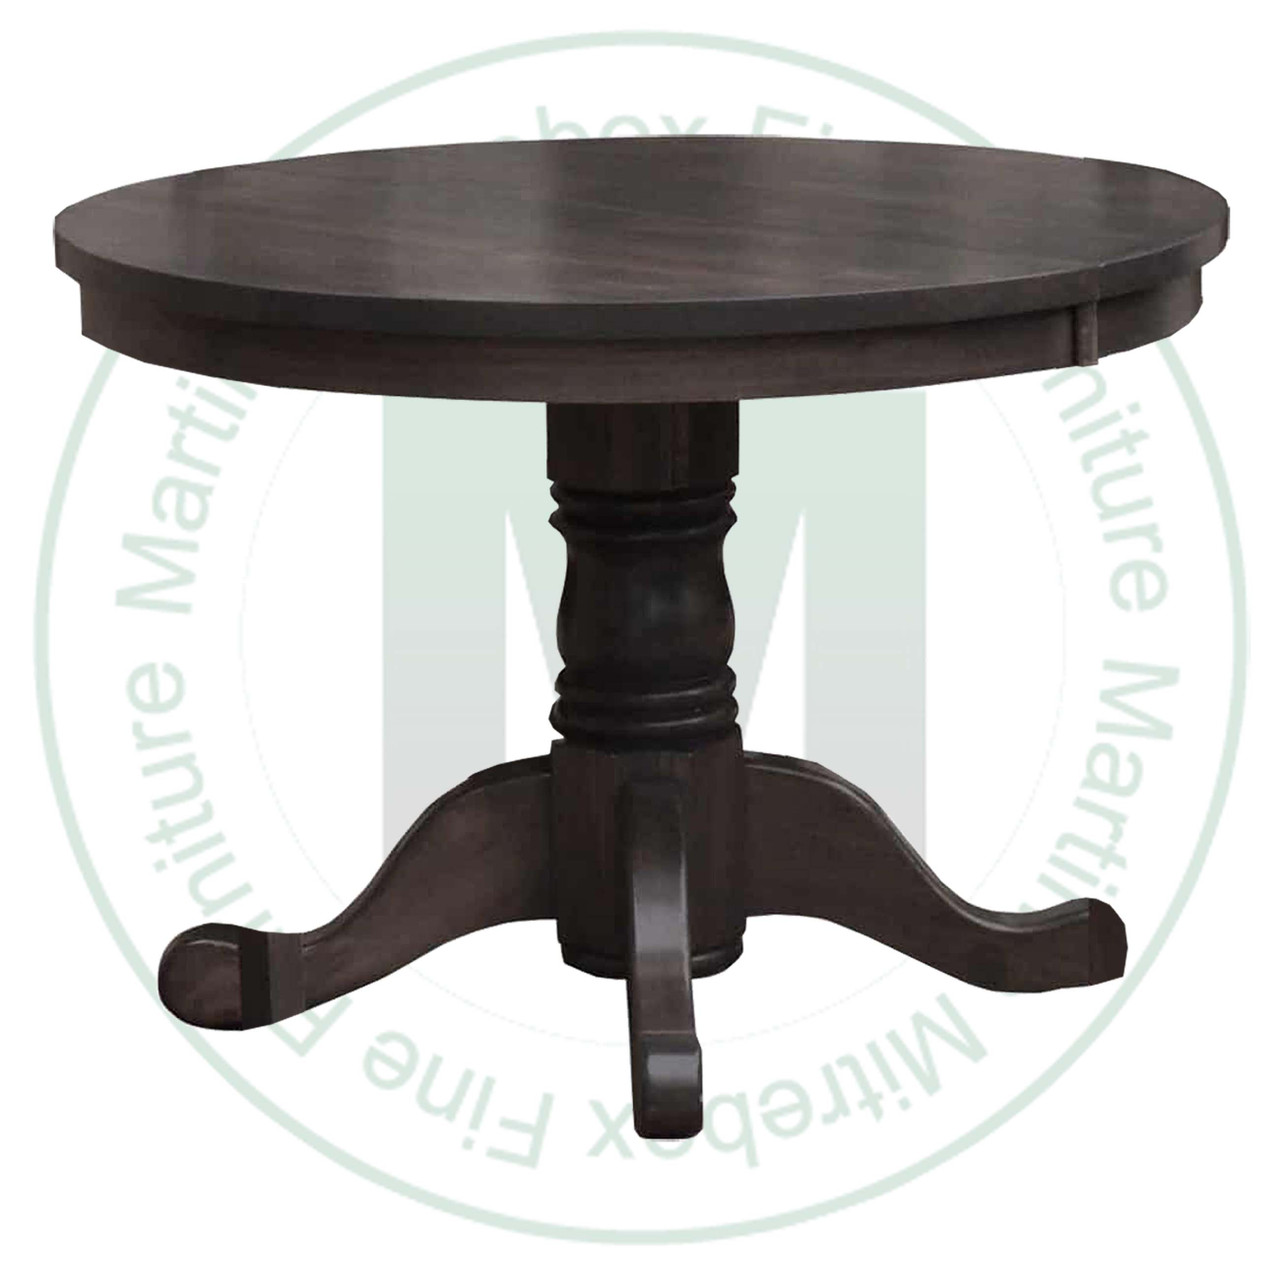 Maple Nith River Single Pedestal Round Solid Top Table 48''D x 48''W x 30''H With 10'' Pedestal